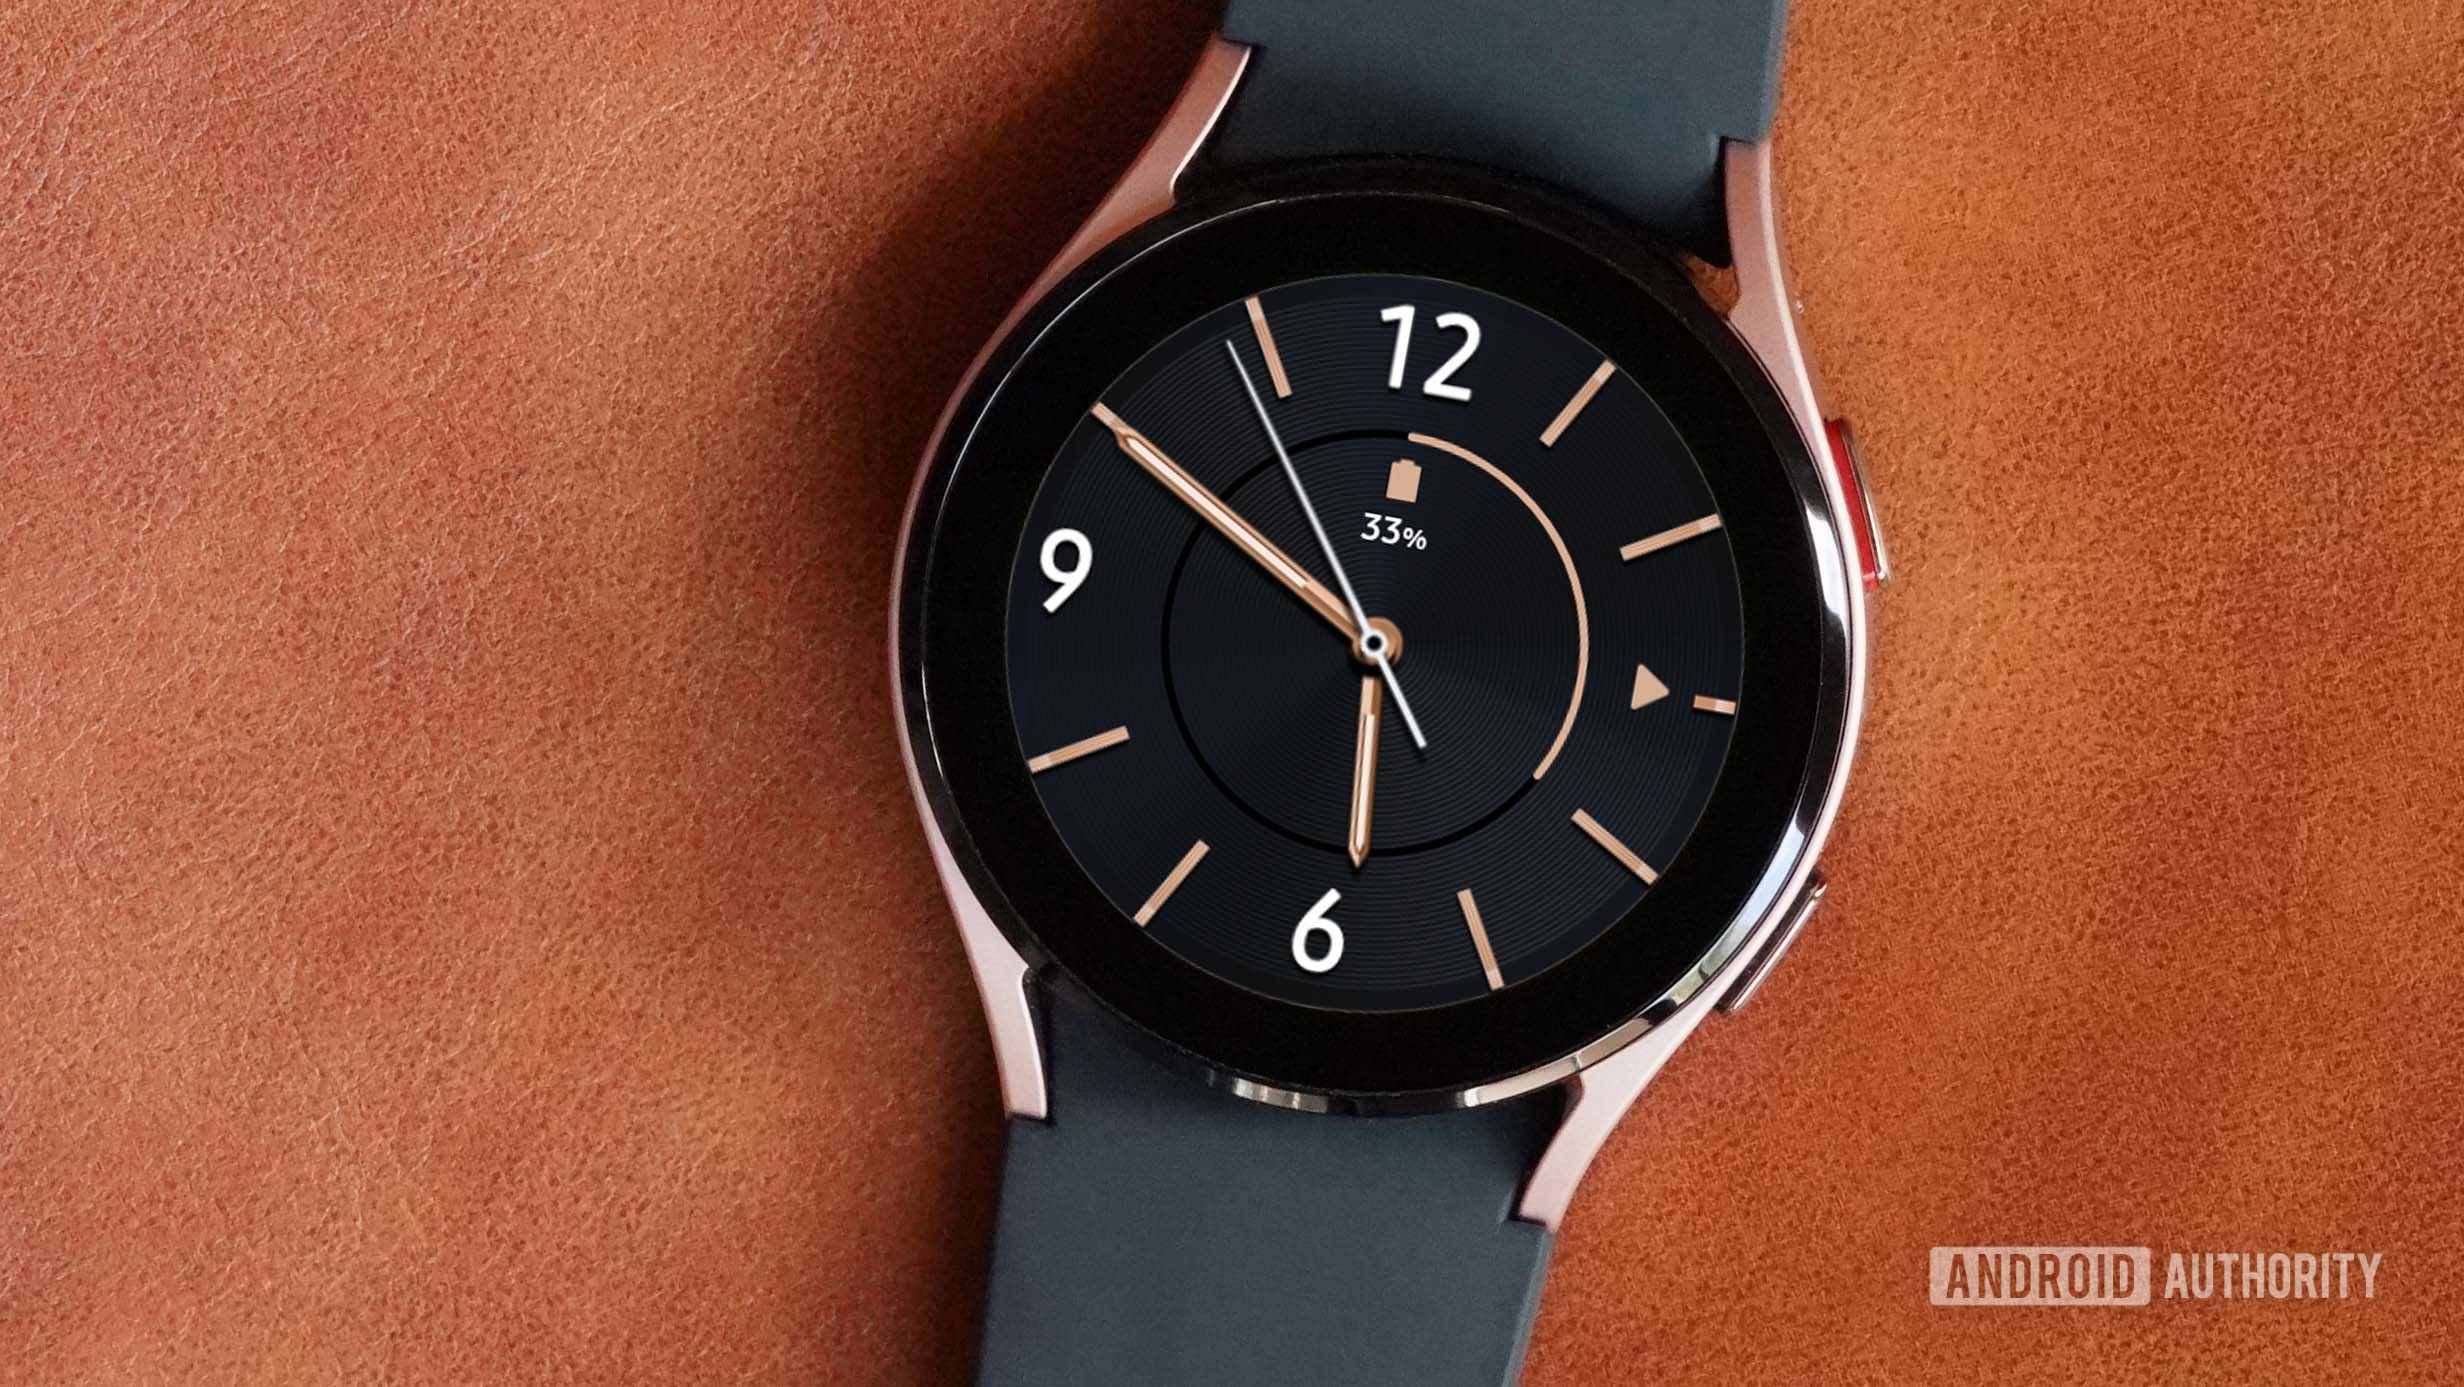 A Samsung Galaxy Watch 4 rests on a tan leather surface and displays the Modern Minimalist watch face.